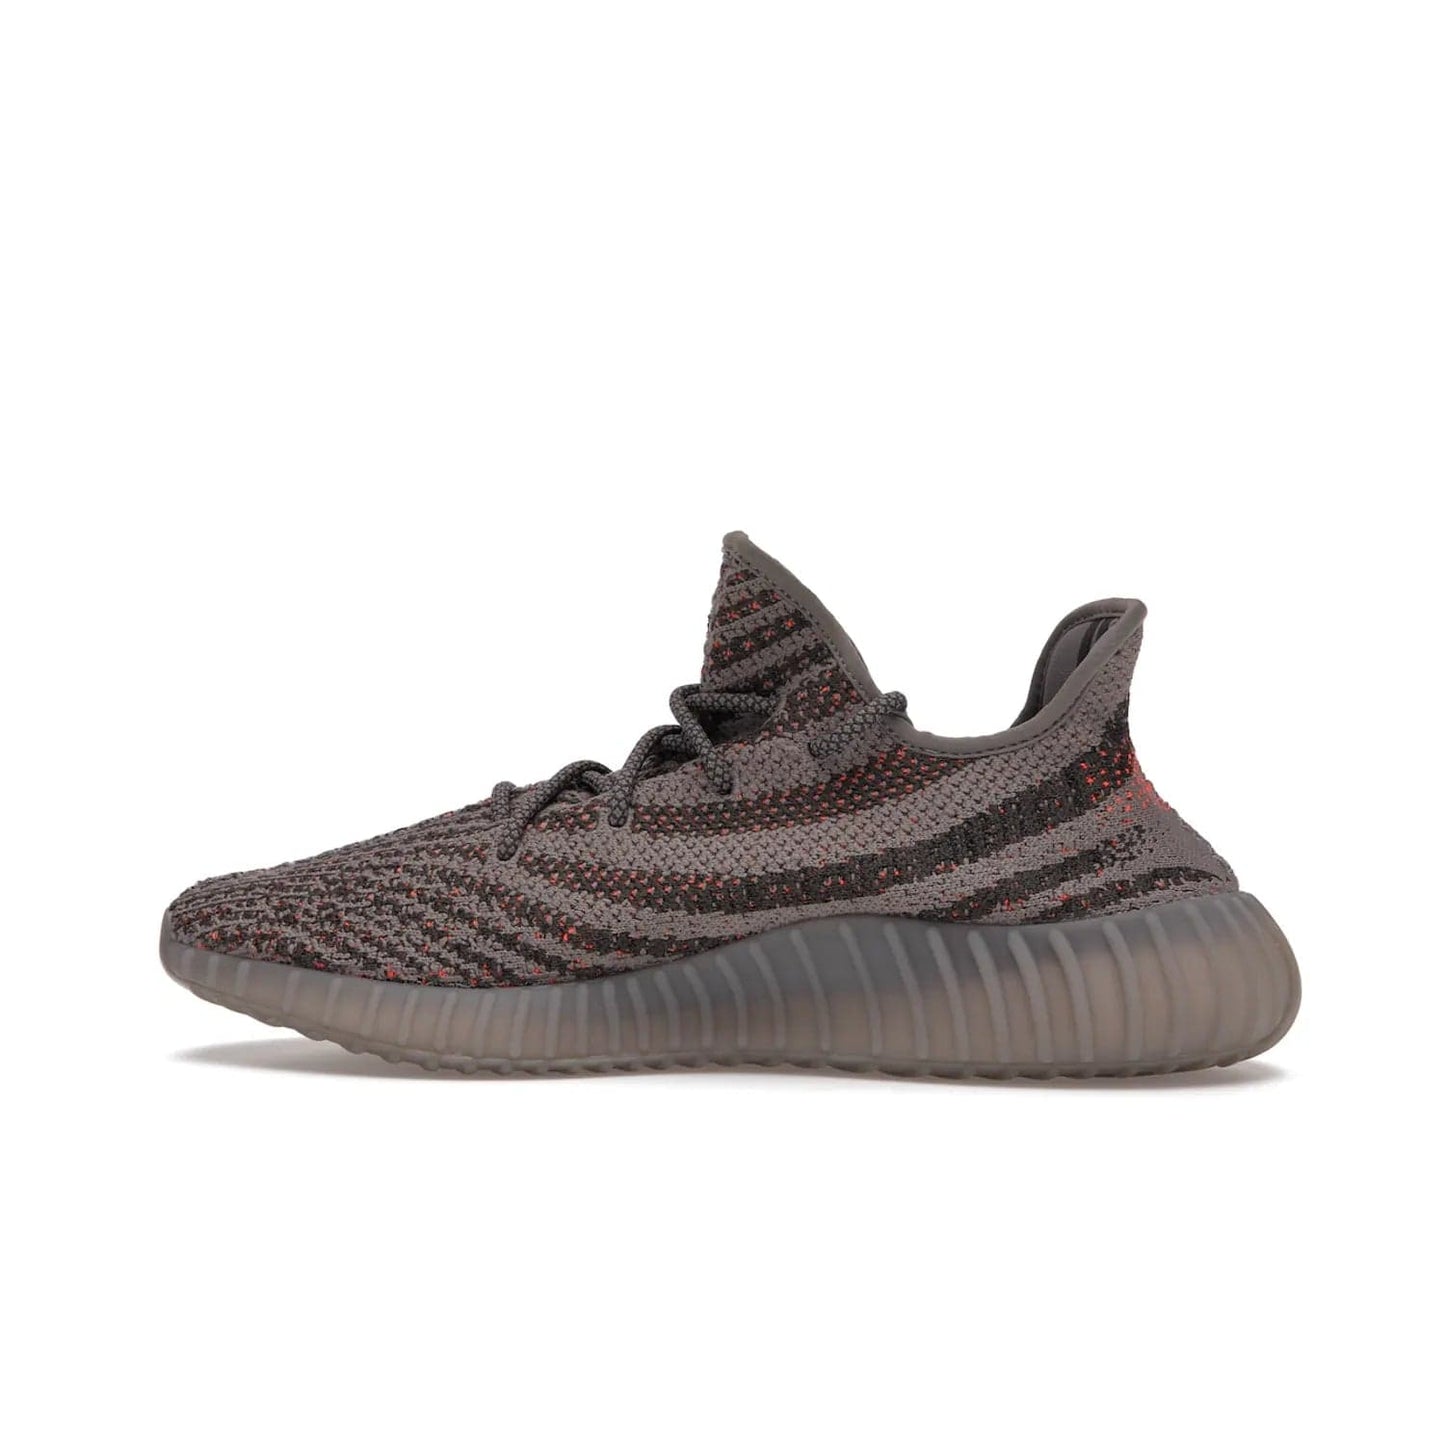 adidas Yeezy Boost 350 V2 Beluga Reflective - Image 20 - Only at www.BallersClubKickz.com - Shop the adidas Yeezy Boost 350 V2 Beluga Reflective: a stylish, reflective sneaker that stands out. Featuring Boost sole, Primeknit upper & signature orange stripe. Available Dec 2021.